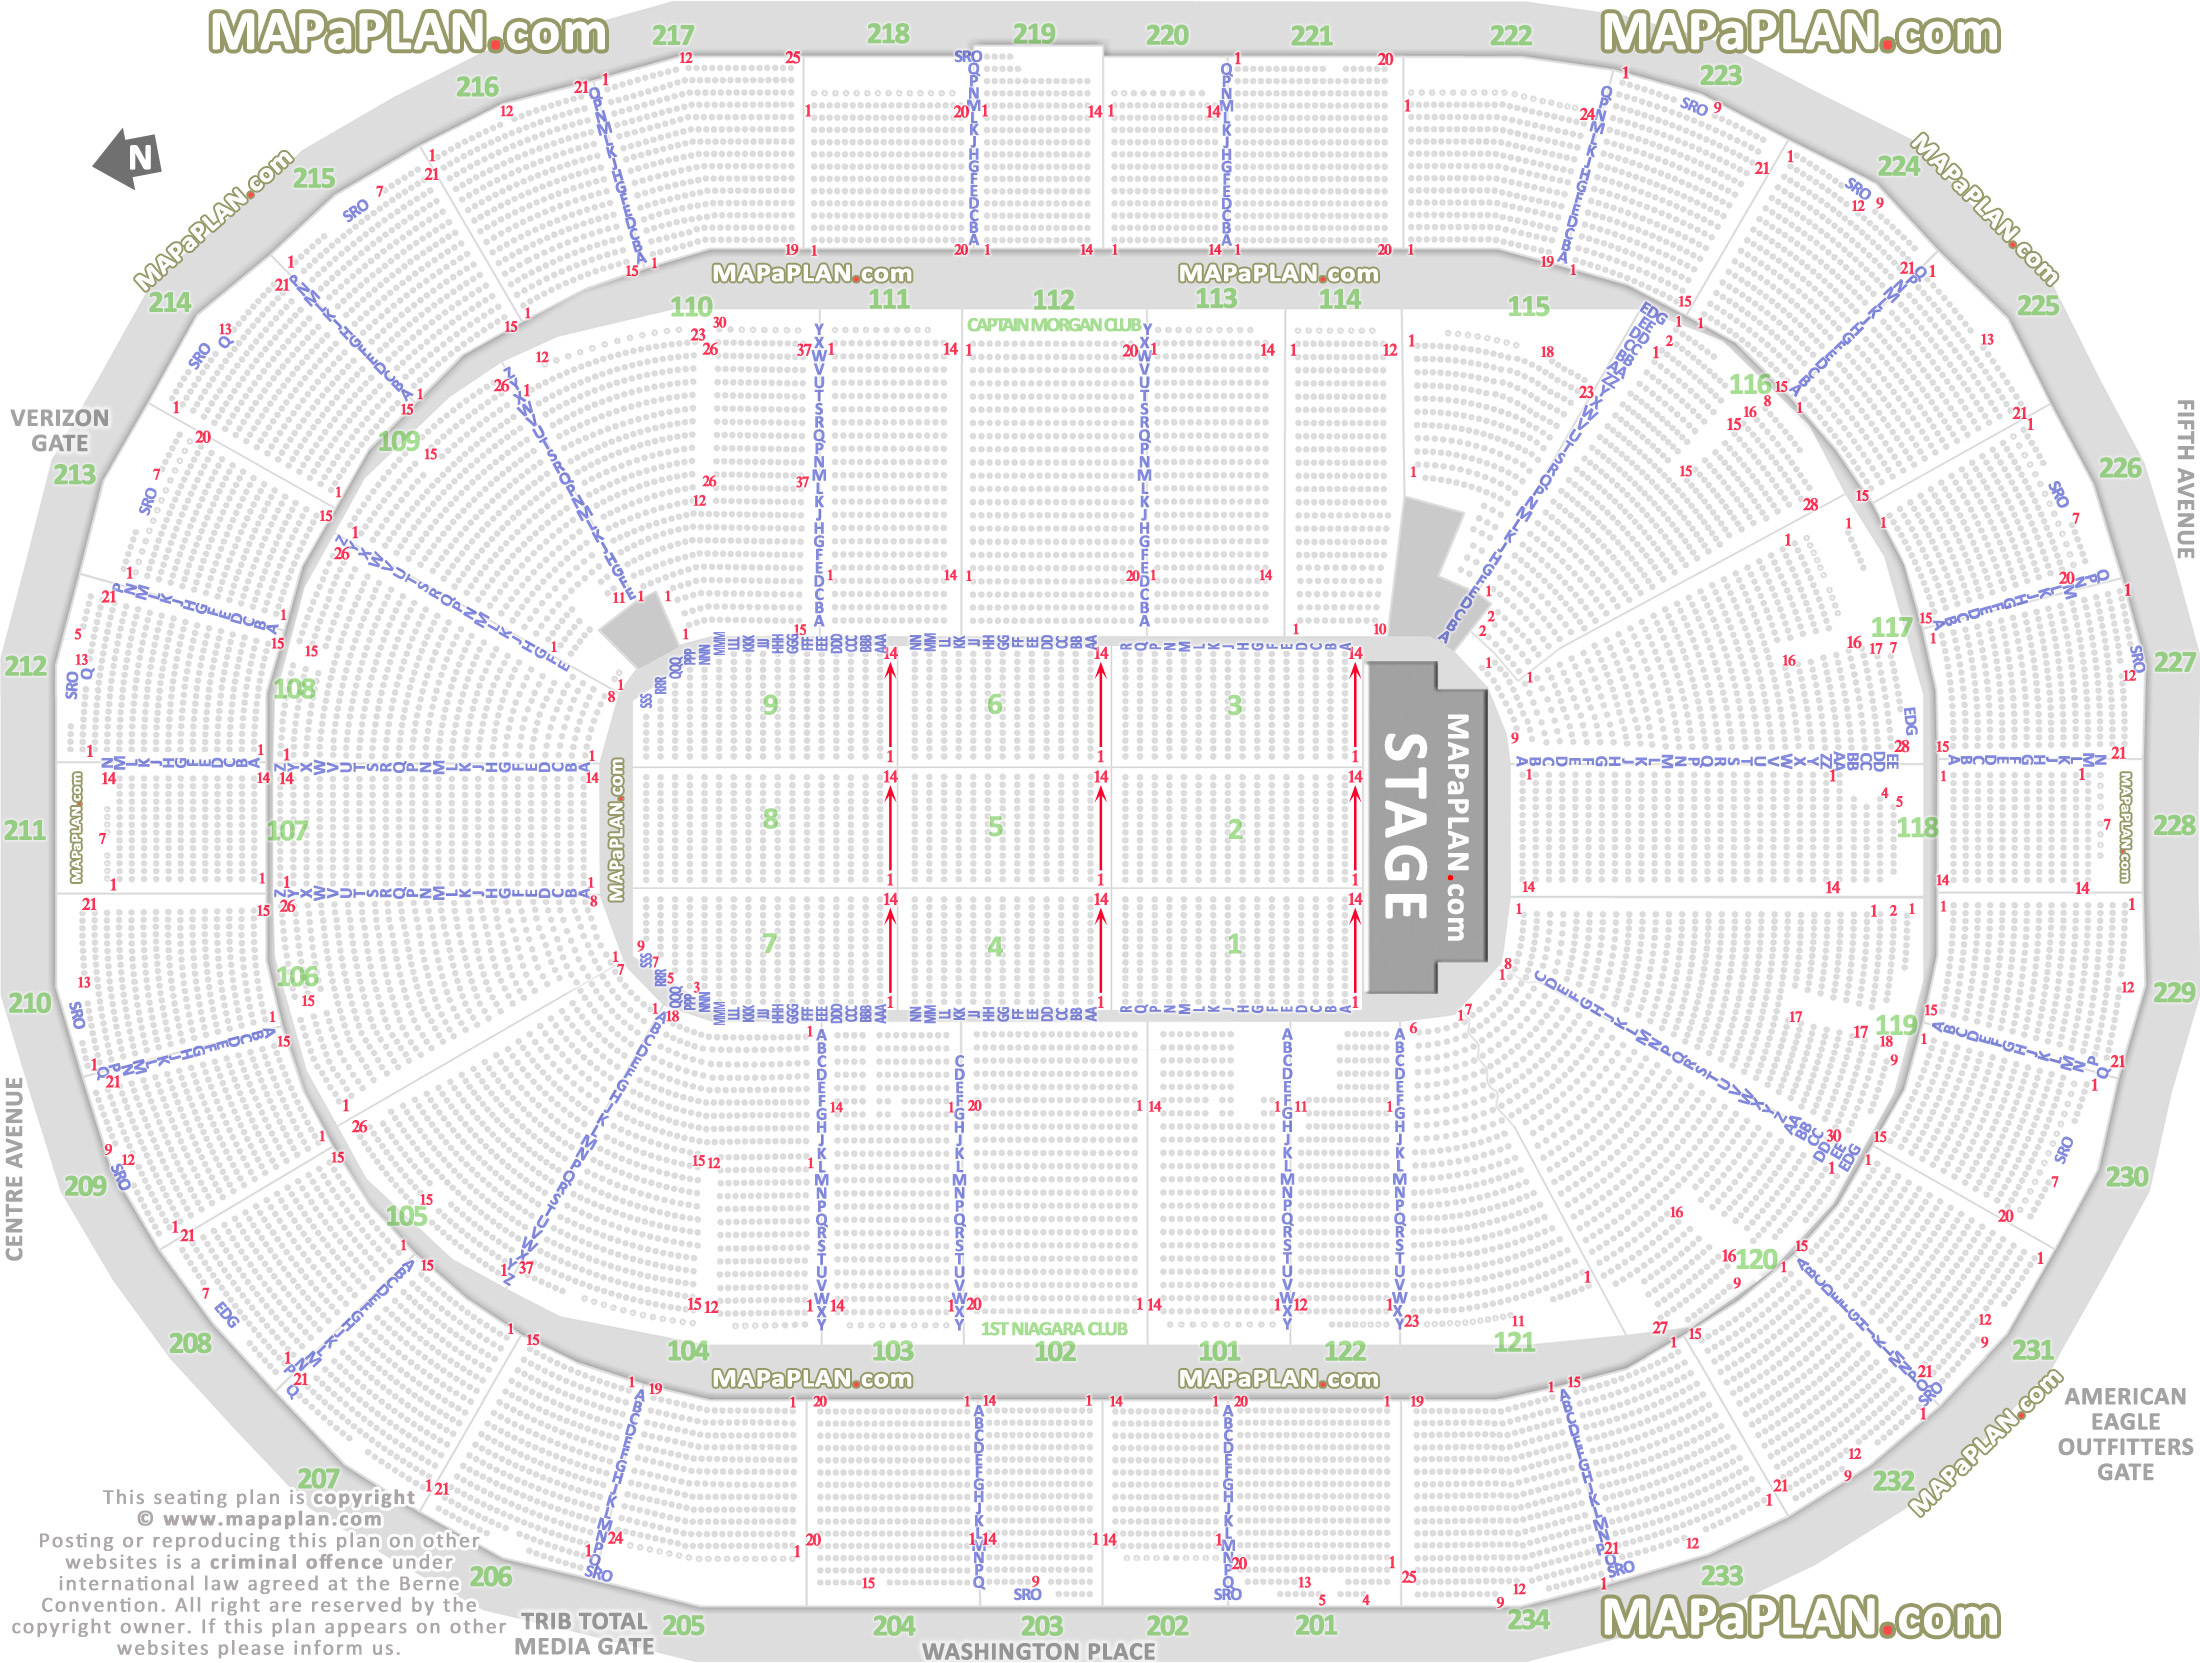 detailed seat row numbers end stage concert sections floor plan map arena lower upper bowl level layout Pittsburgh PPG Paints Arena seating chart